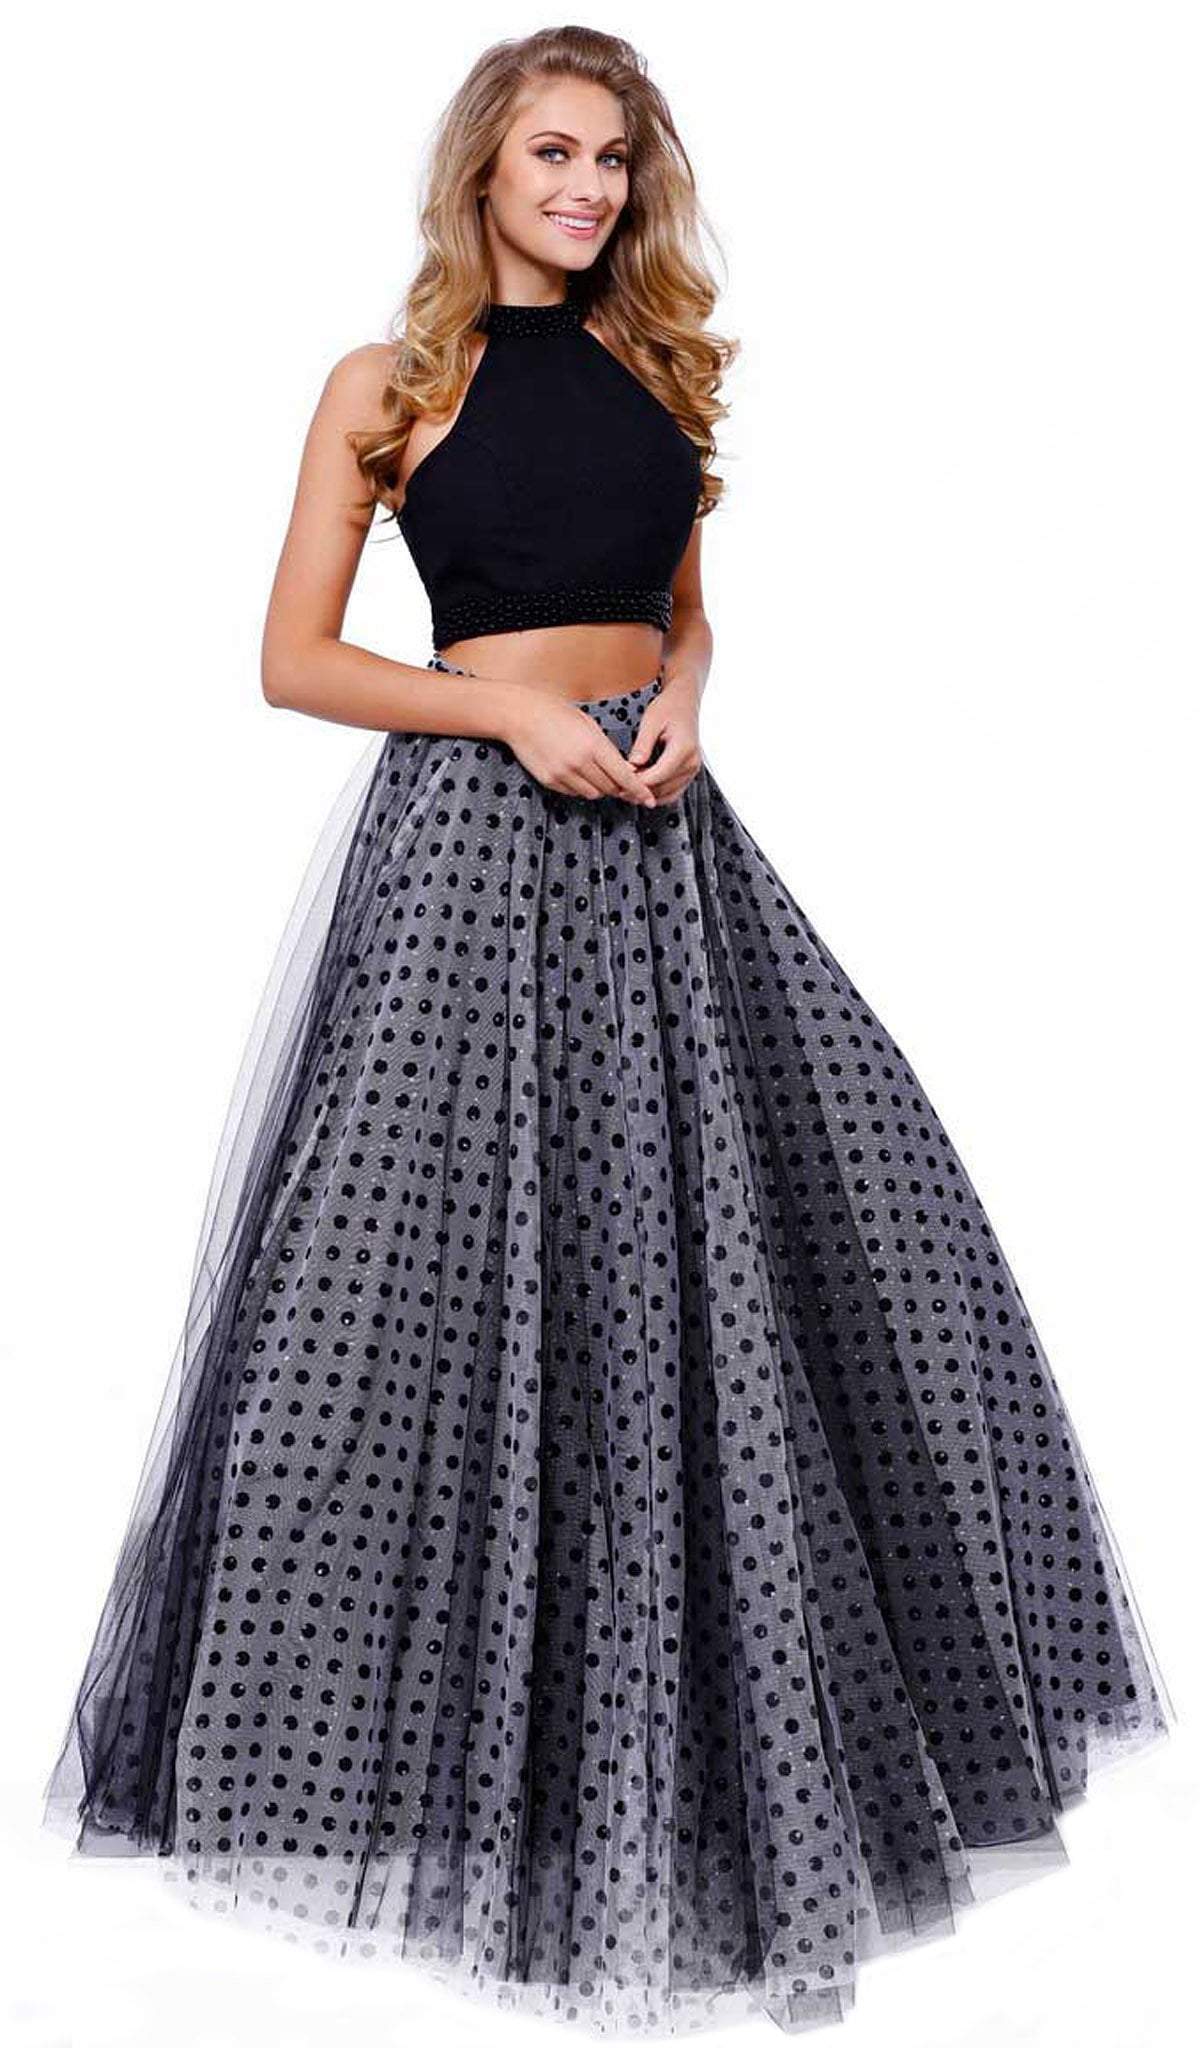 Nox Anabel - 8204 Two-Piece Halter Polka Dot Printed Evening Gown